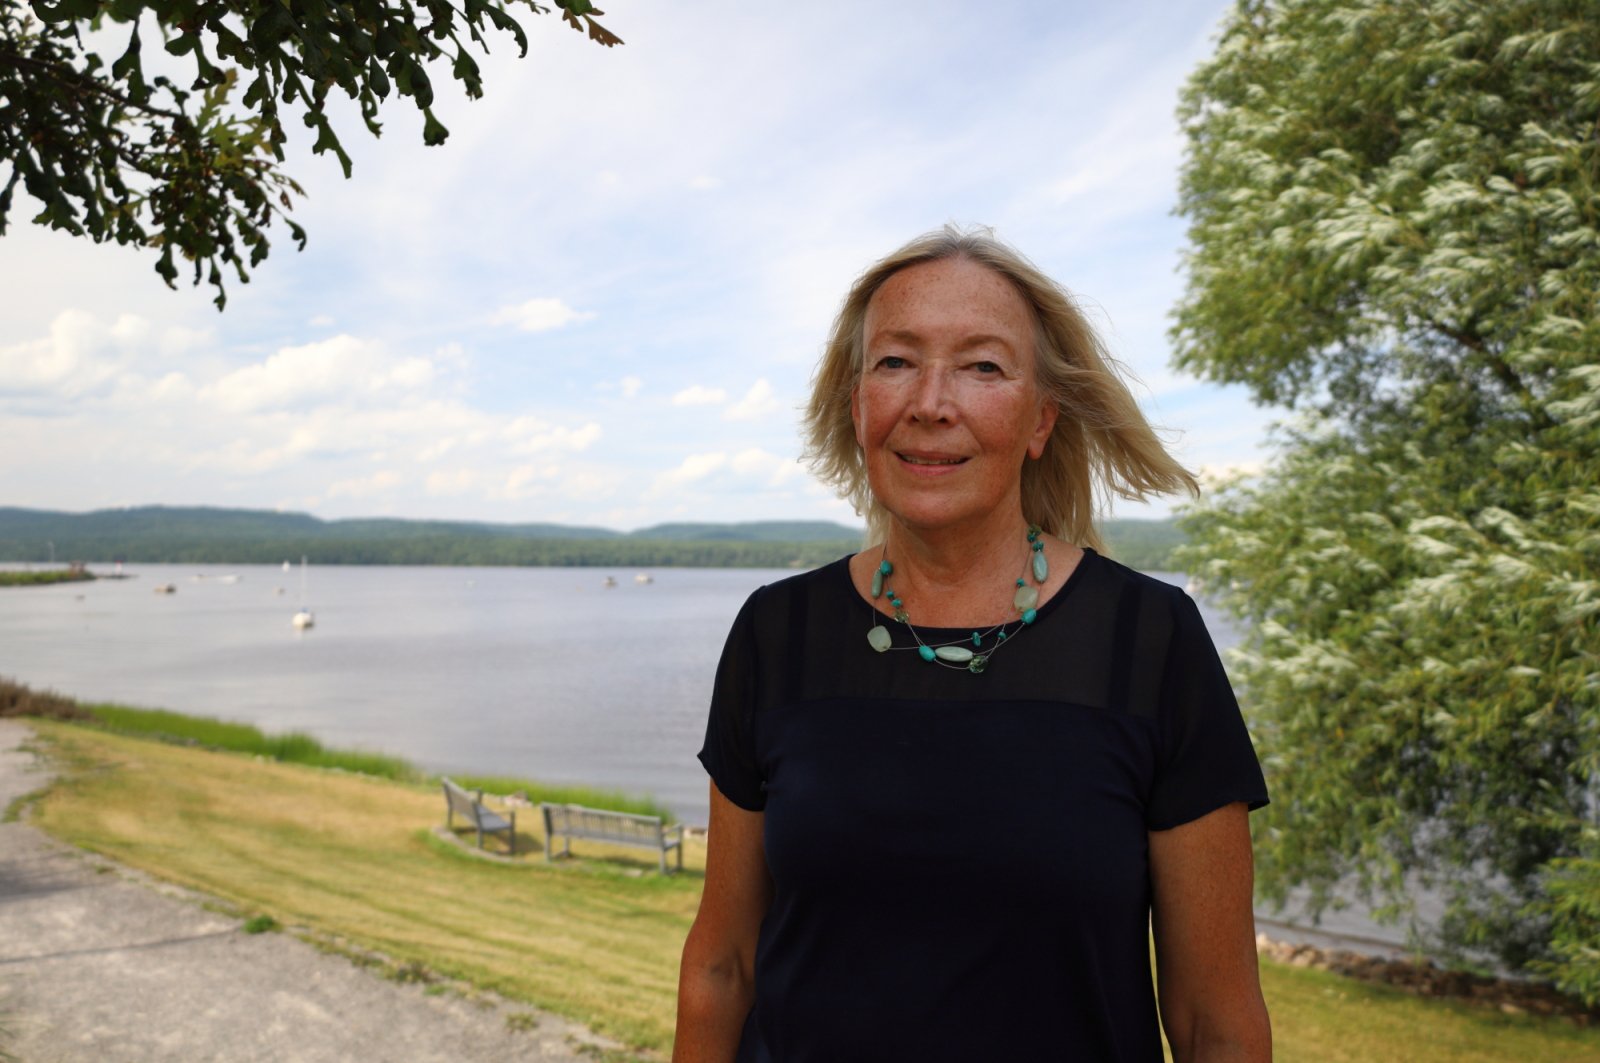 Deep River Mayor Suzanne D'Eon stands near a ncie spot at the river on a sunny day